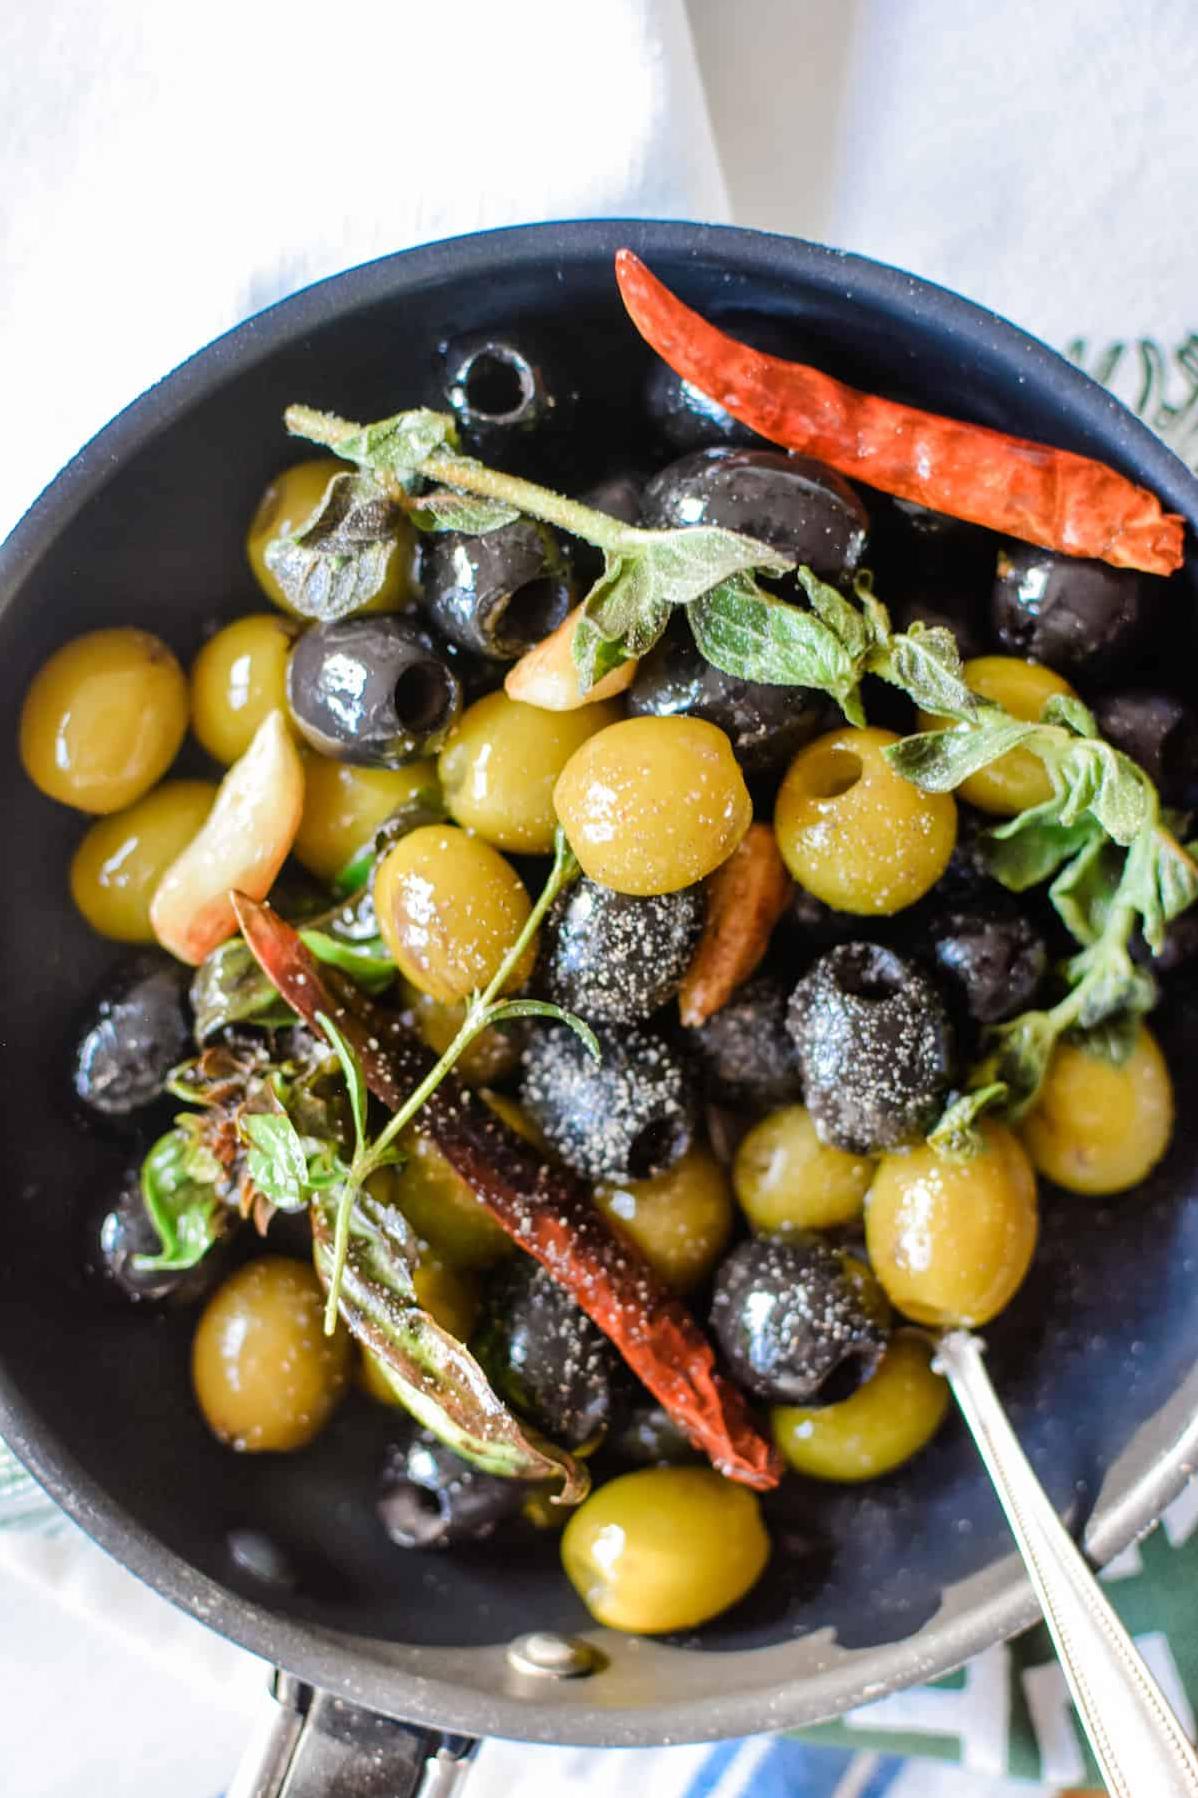  Want to impress your guests? Serve up these flavorful and unique olives